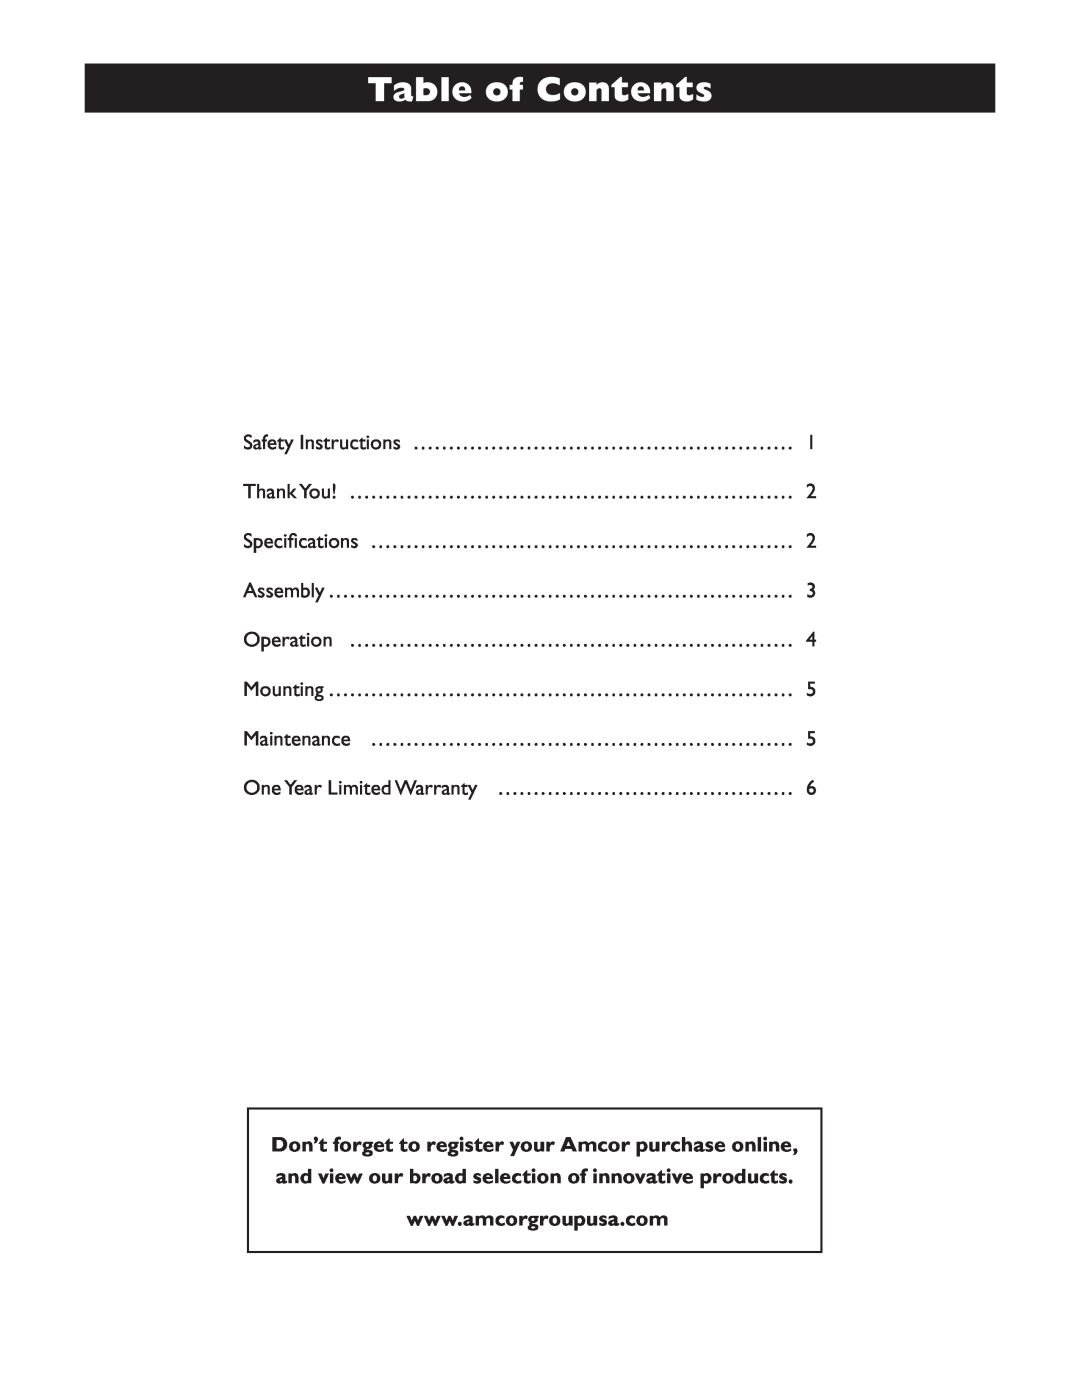 Amcor AMH9 owner manual Table of Contents 